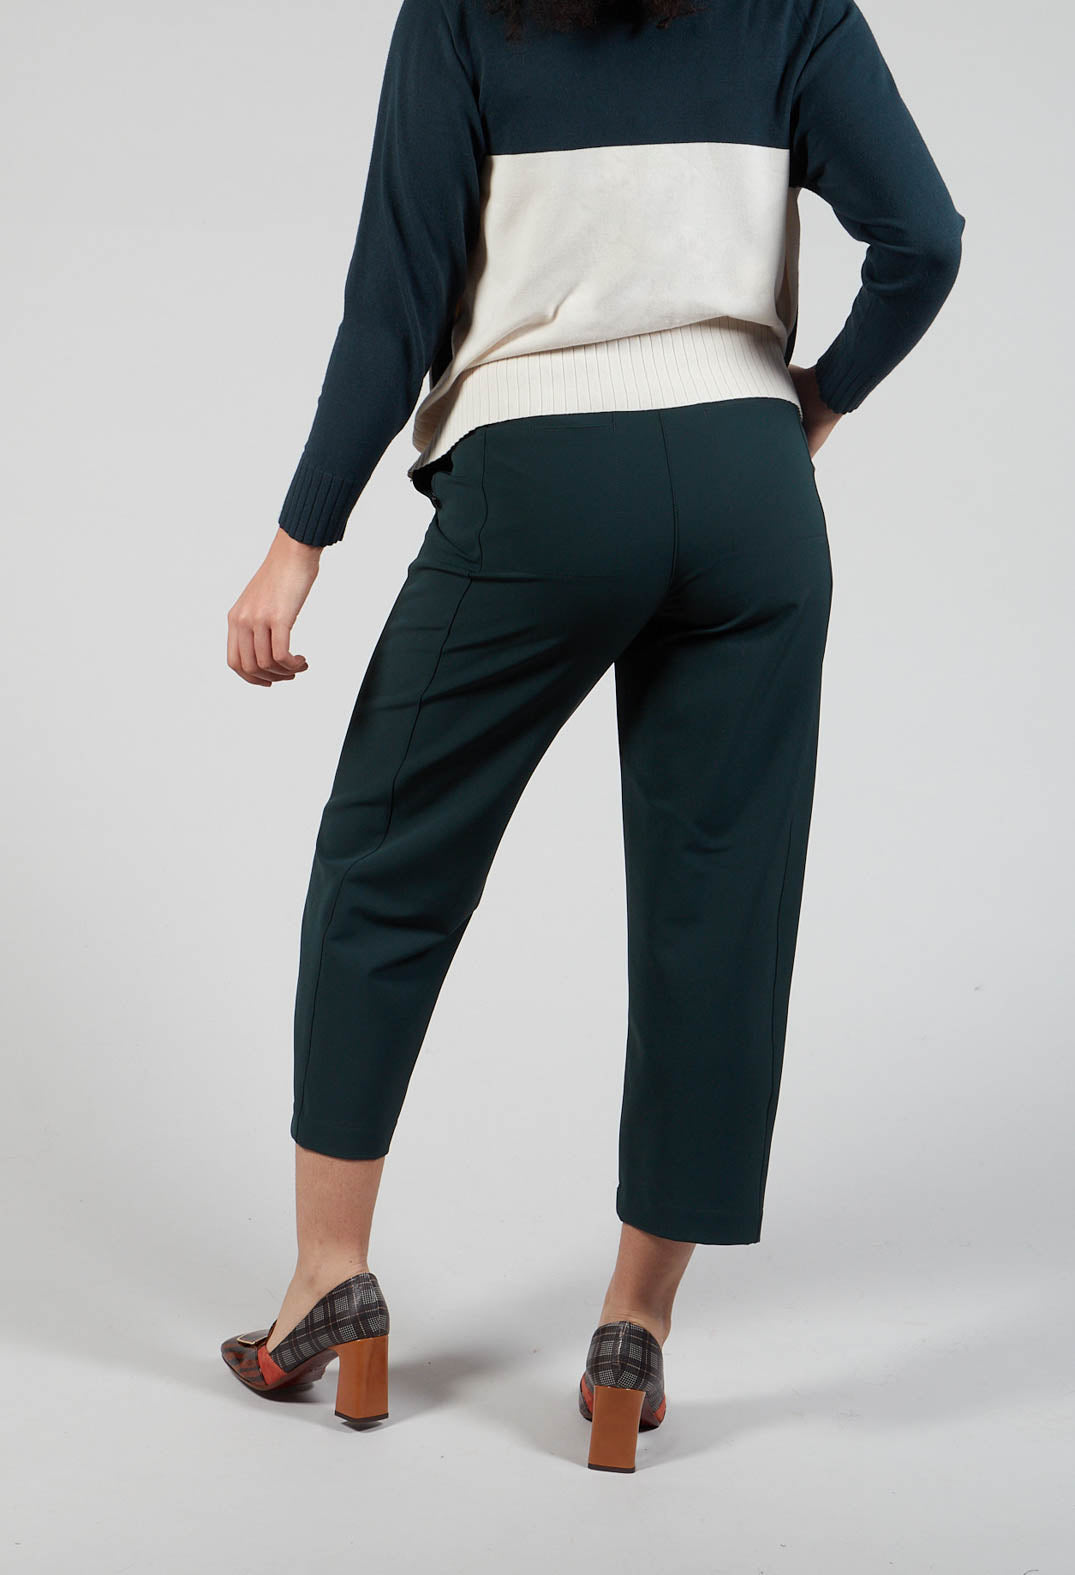 Gent Trousers in Cypress